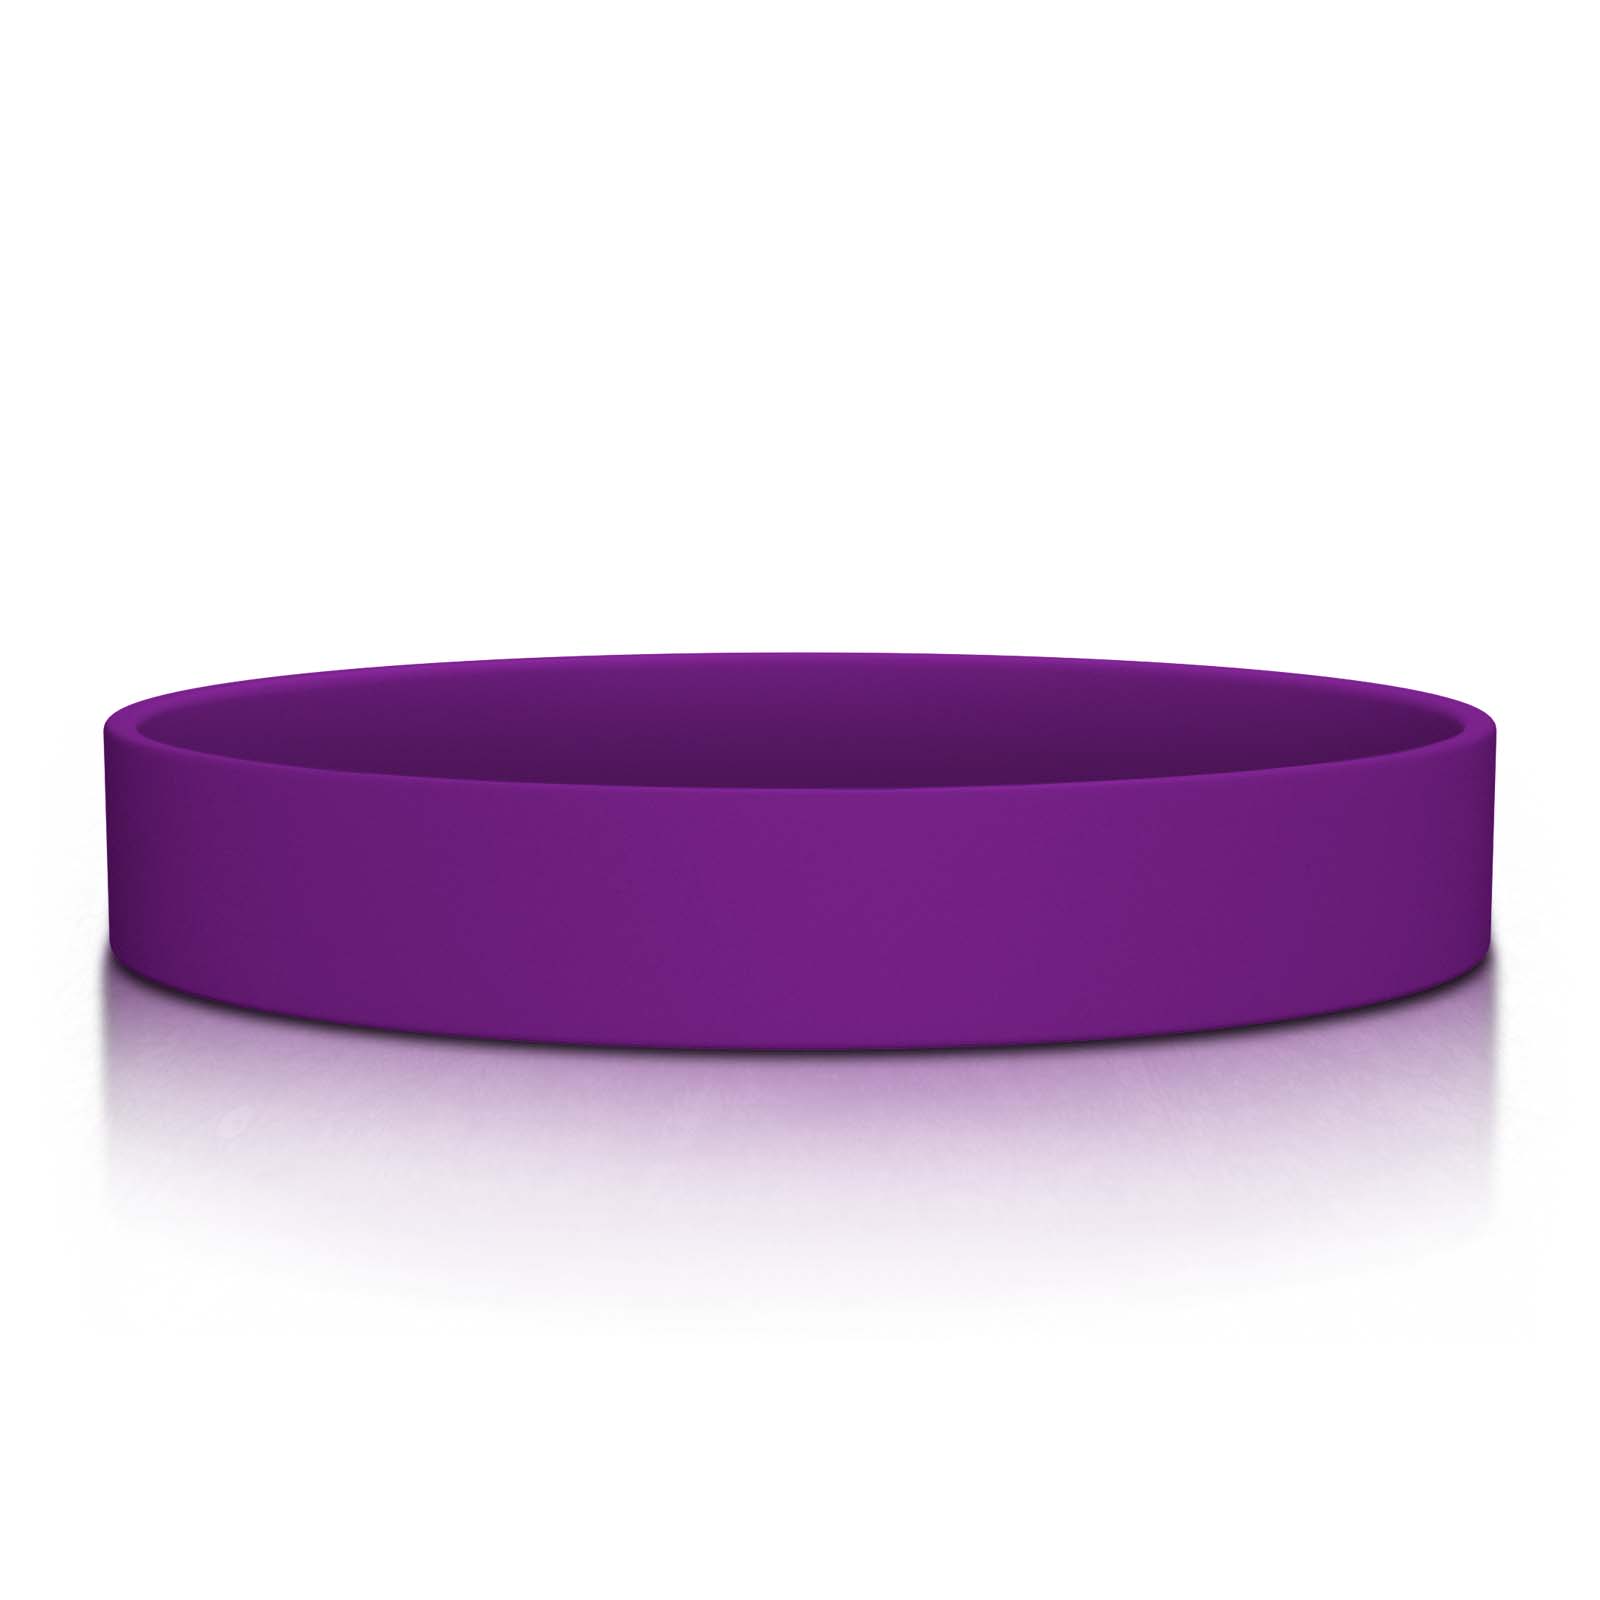 13mm Silicone Stretch ID Bands for Medical Bracelets